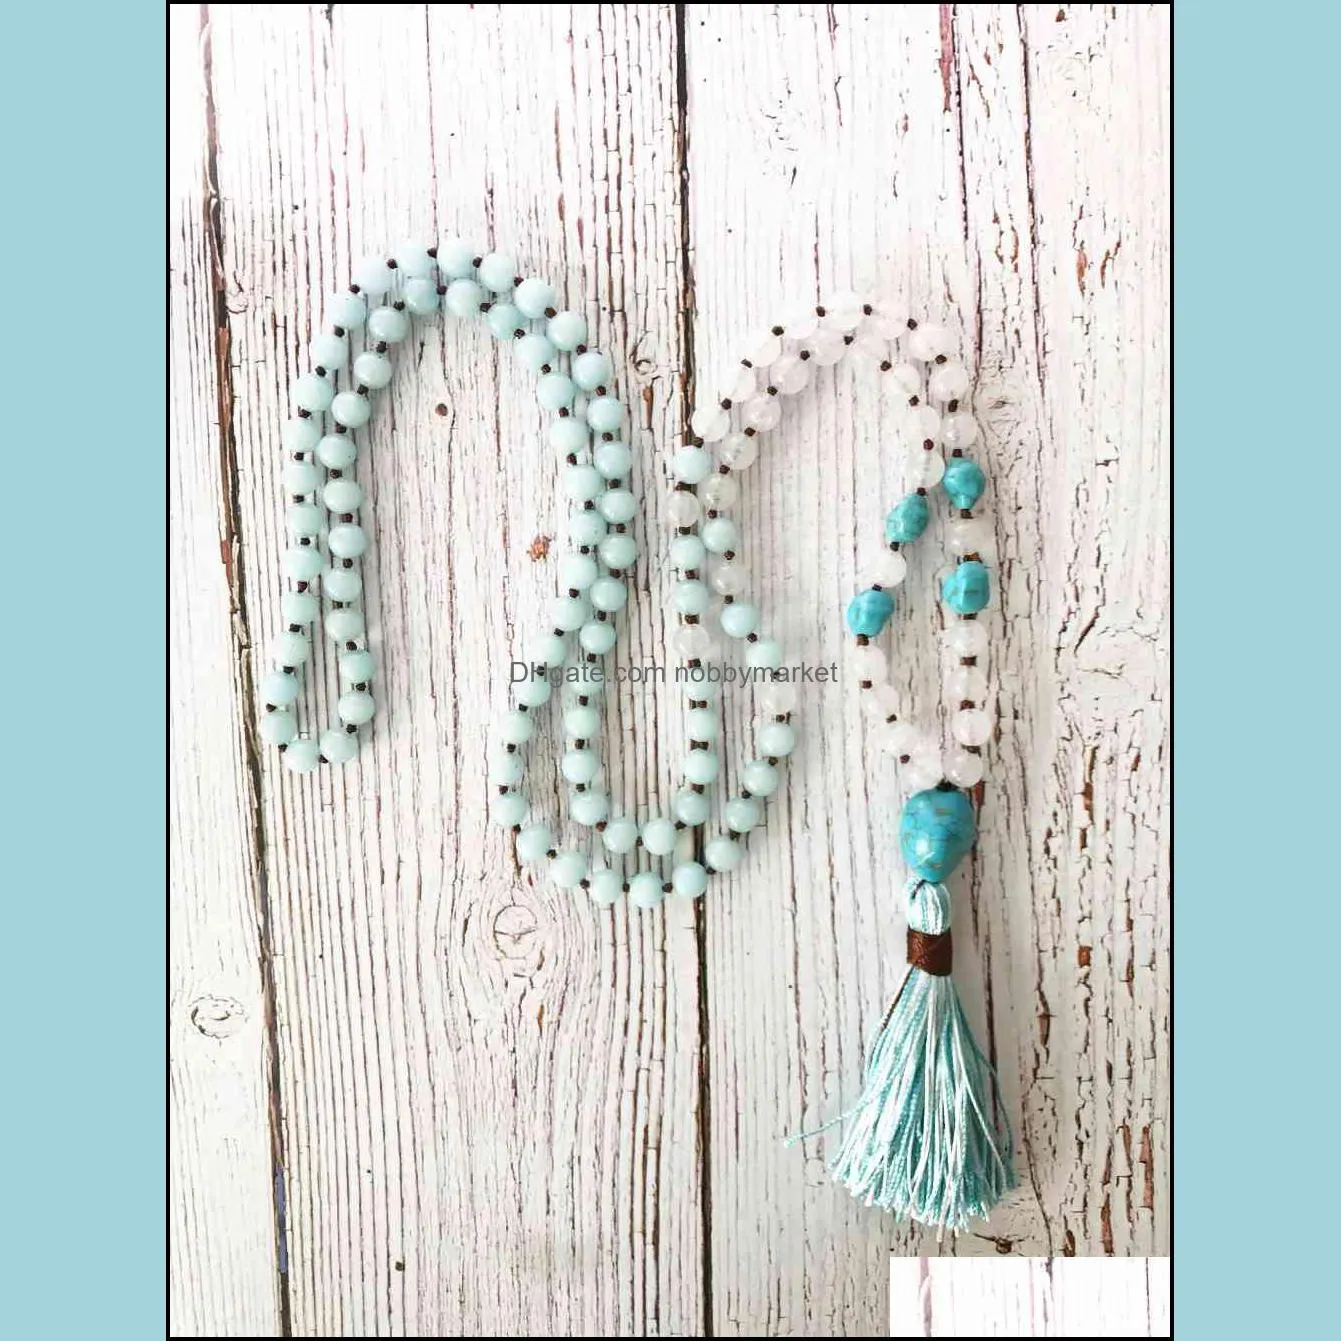 108 mala beads Necklaces Hand Knotted White jades necklace Bule Meditation Necklaces tassel necklace Yoga Mala Bead best gift 210323